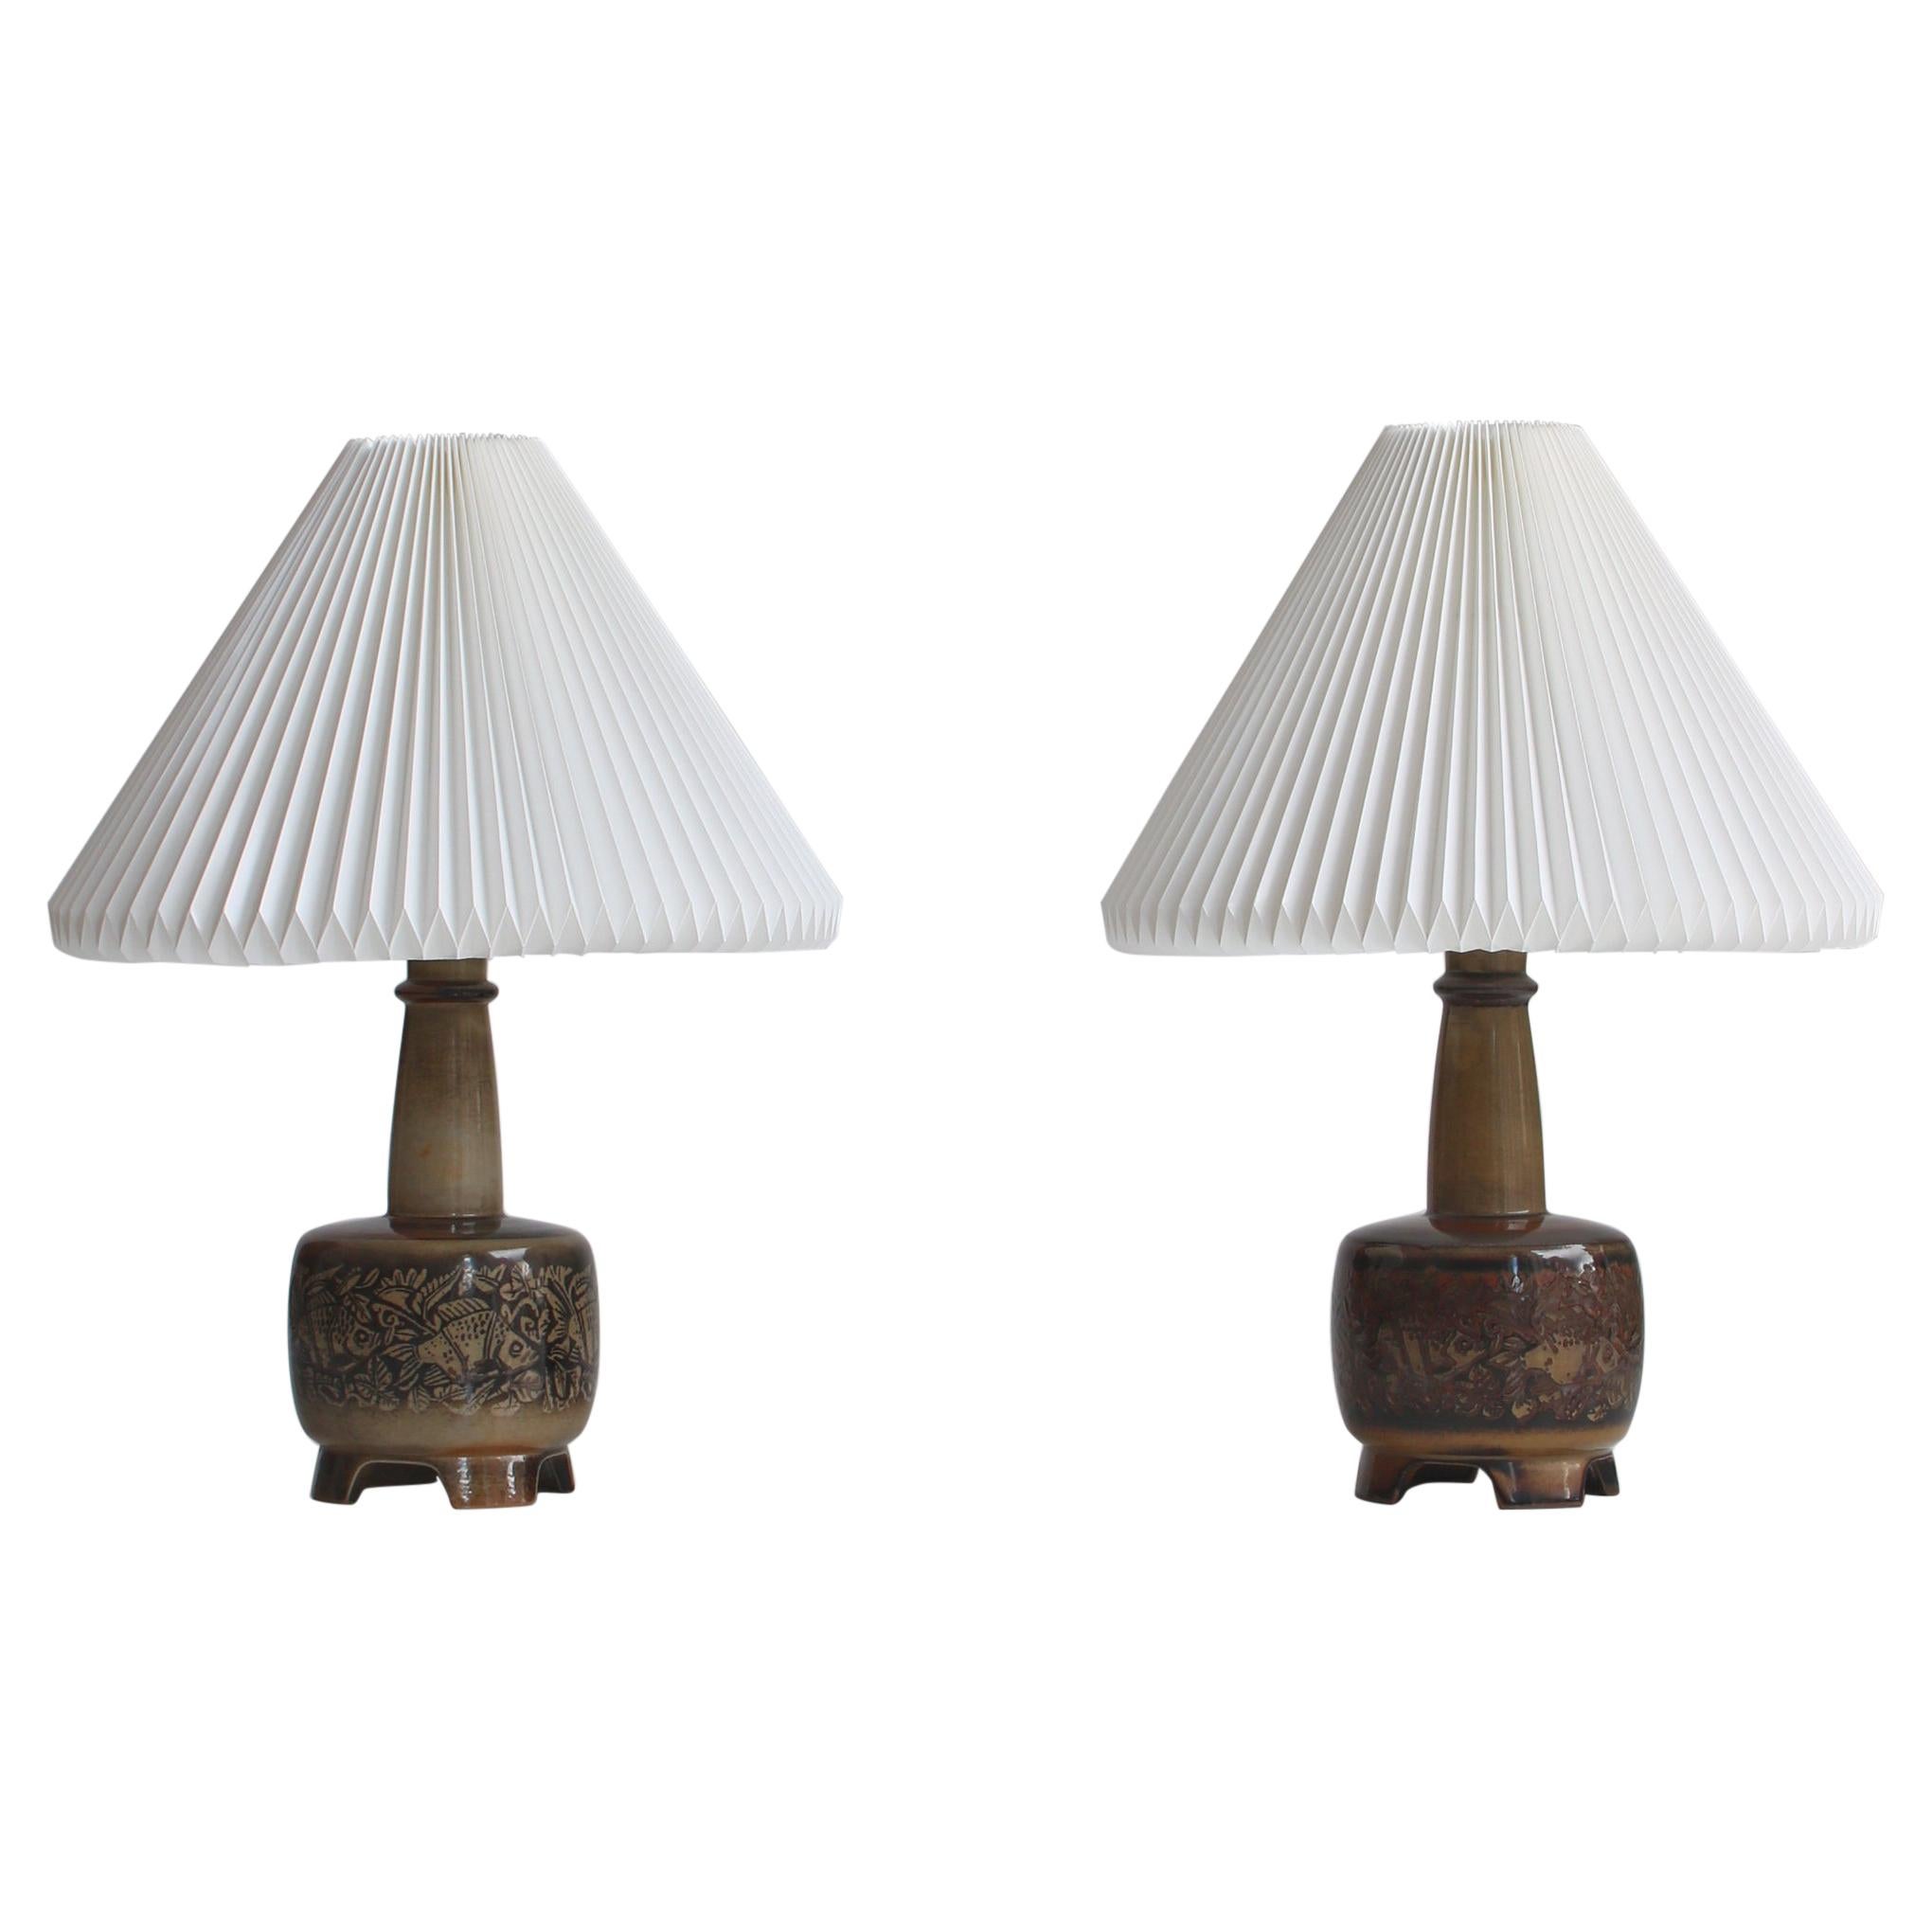 Stoneware Table Lamps by Nils Thorsson for Royal Copenhagen with Le Klint Shades